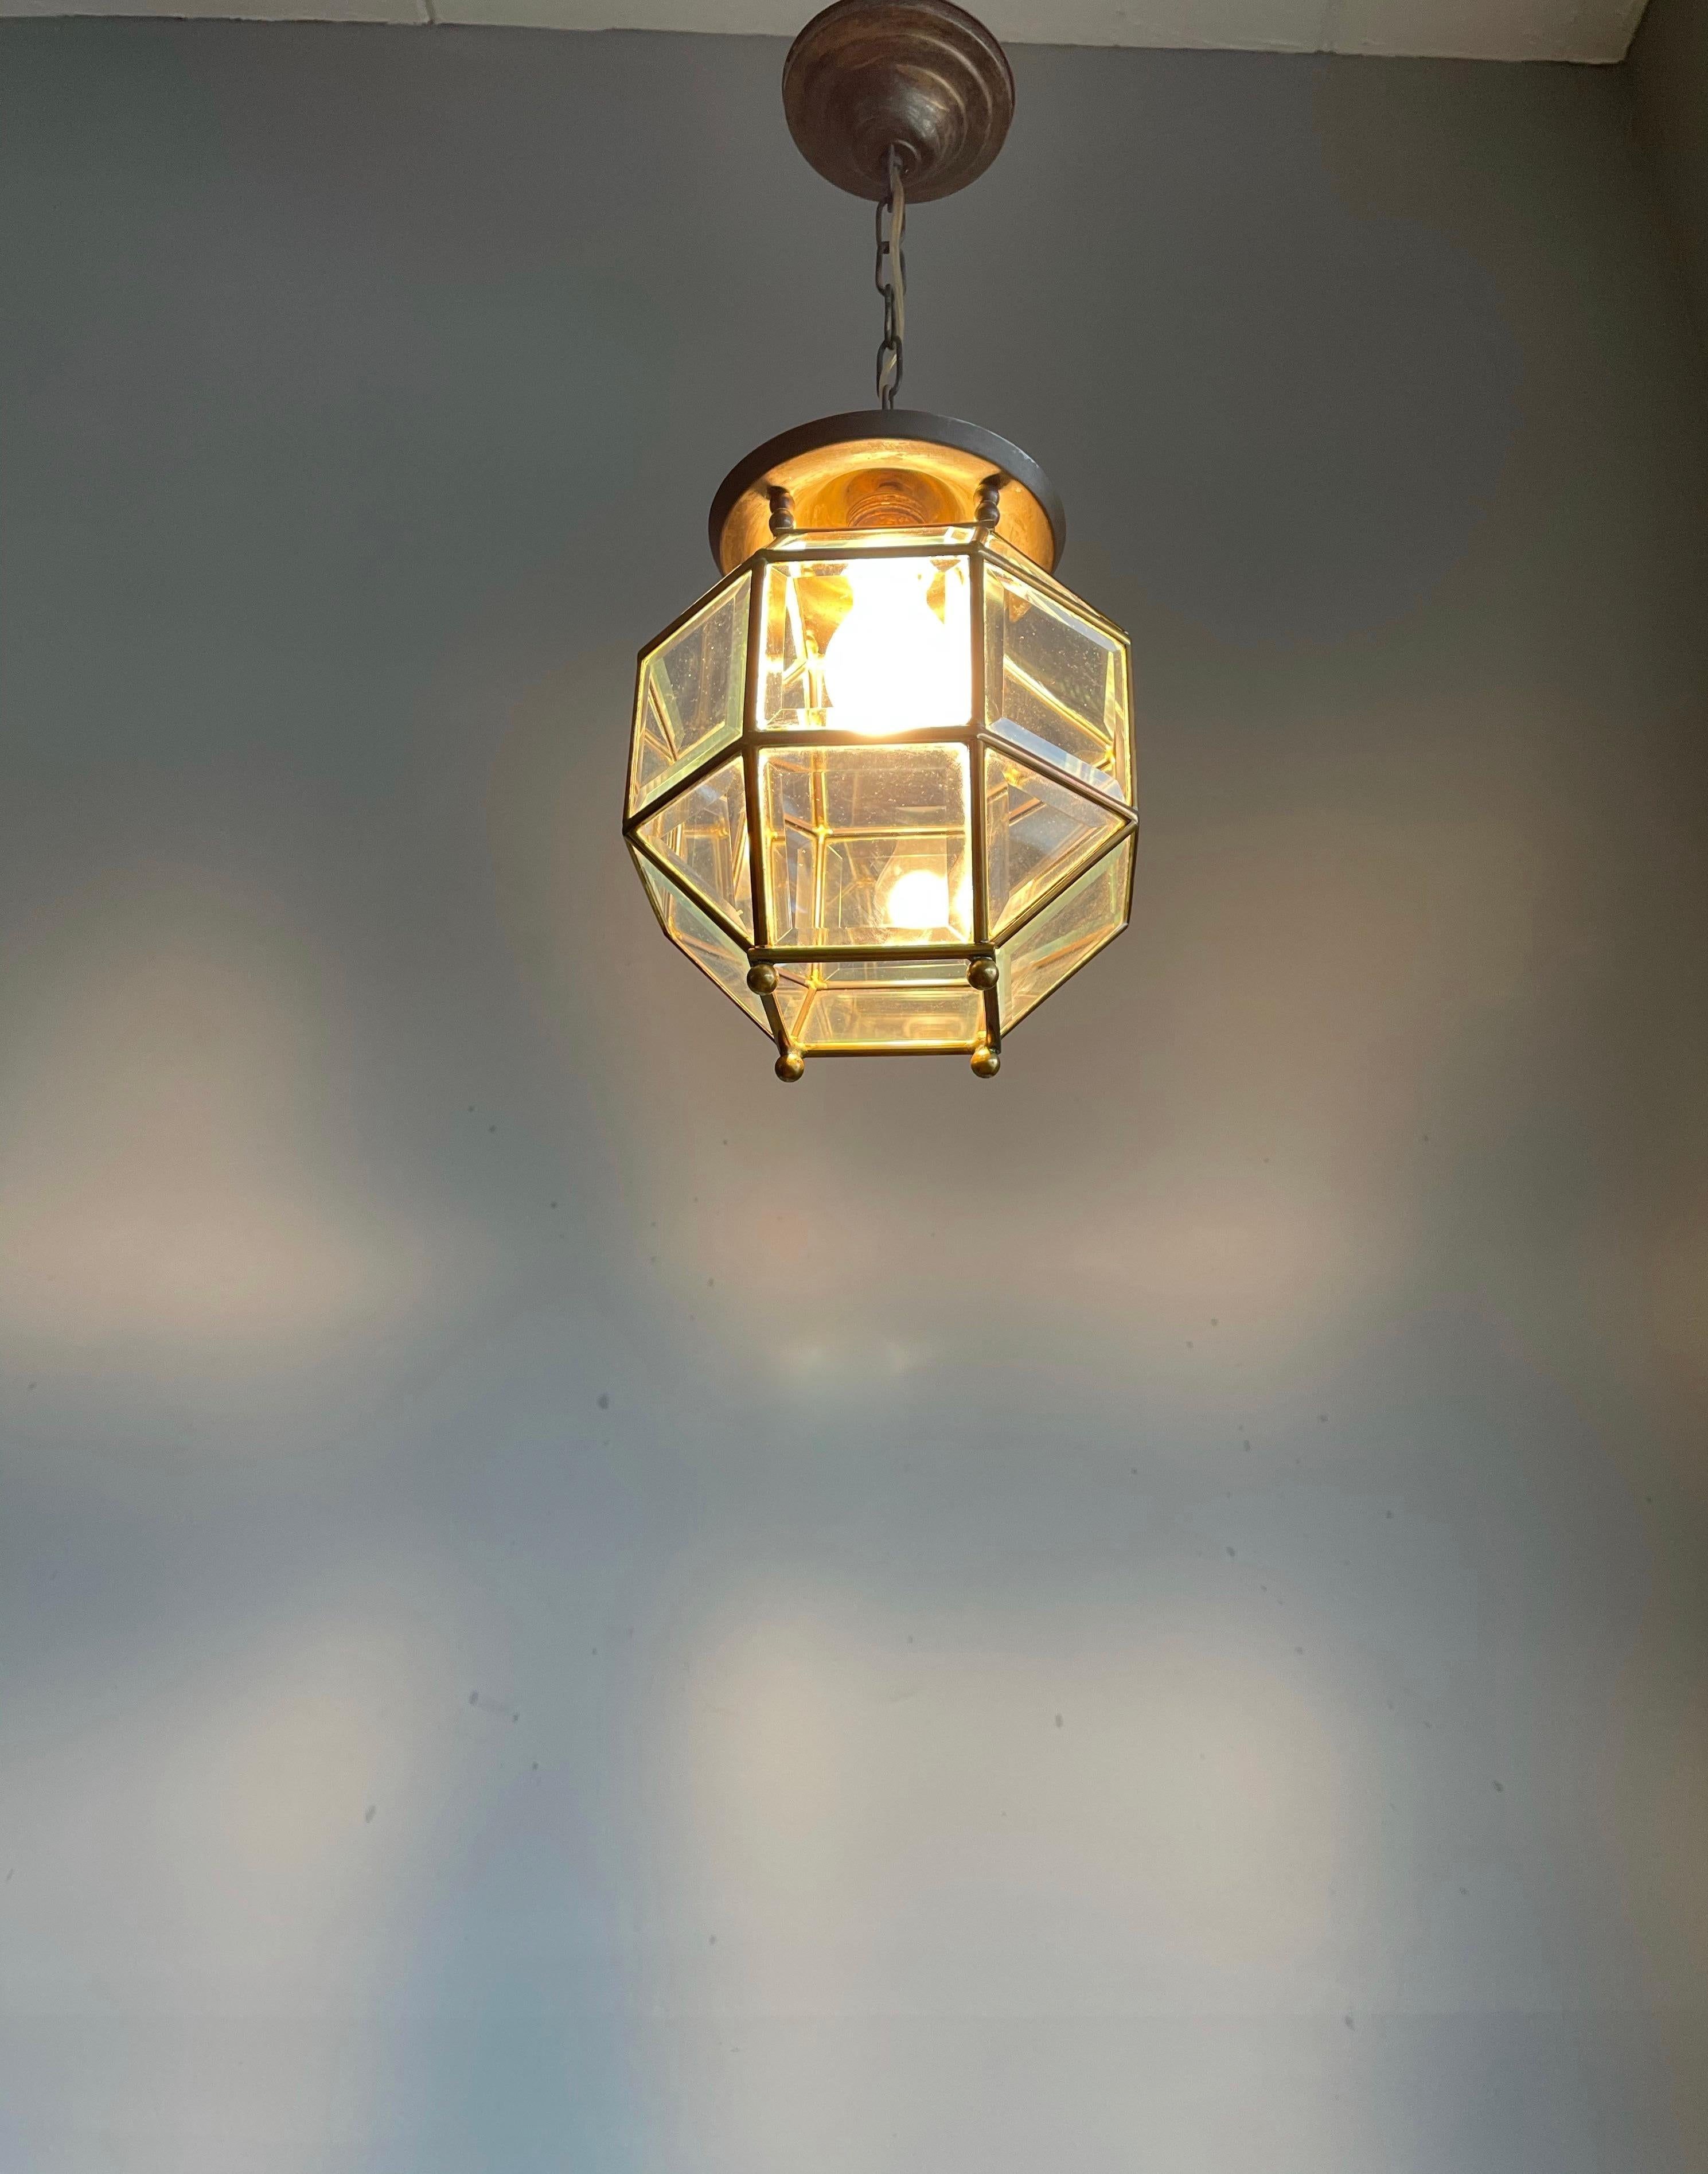 Early 1900s Beveled Glass and Brass Pendant Cubic Adolf Loos Style Ceiling Light 13